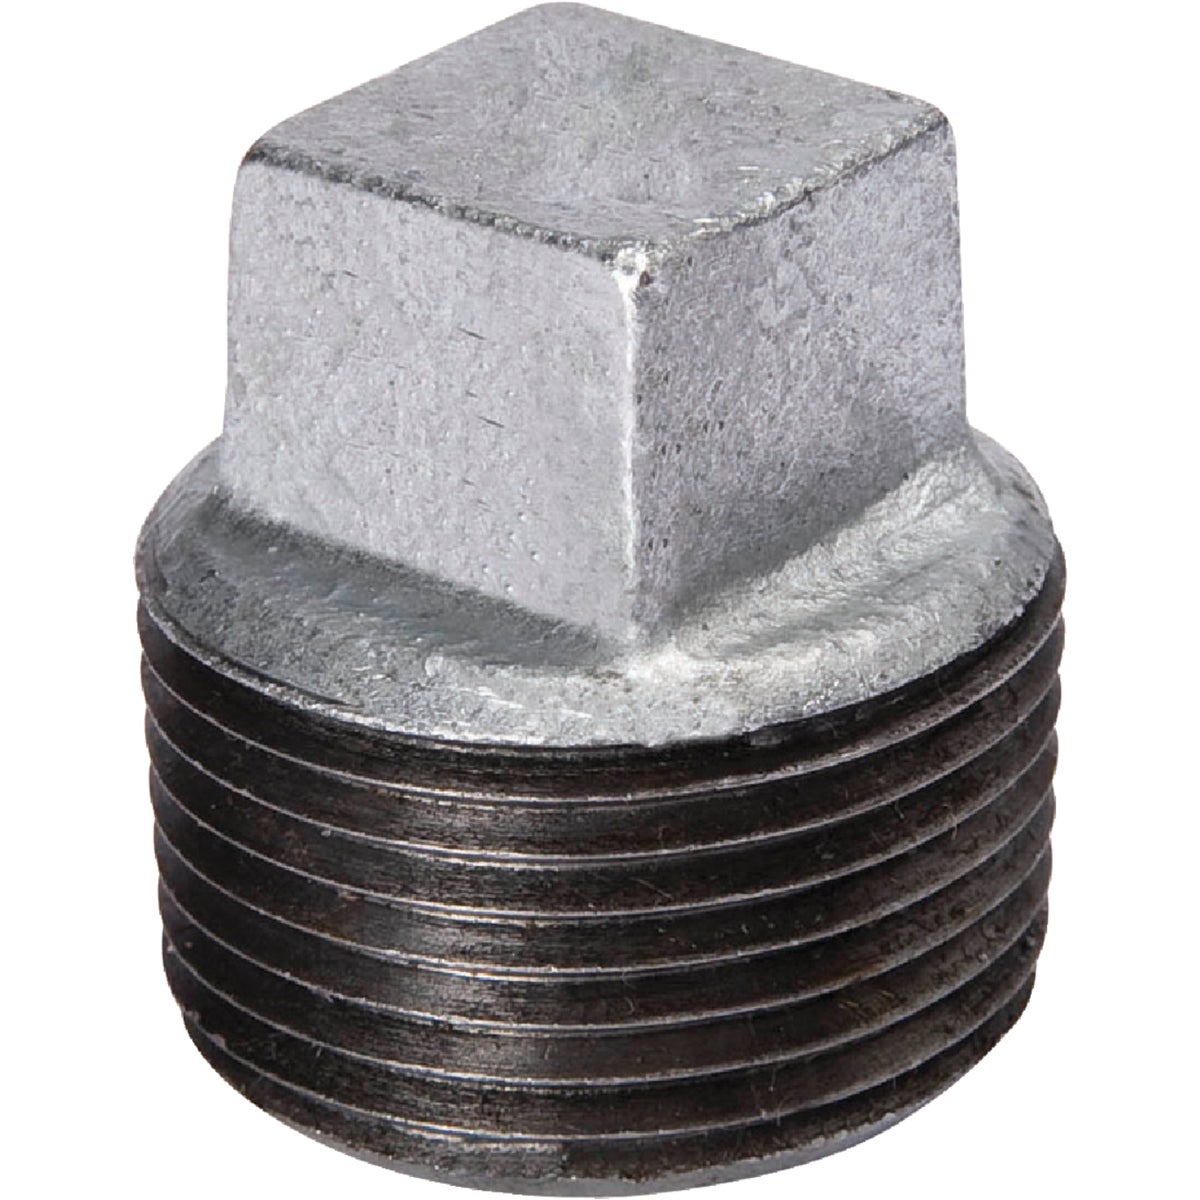 Southland 1/2 In. Malleable Iron Galvanized Plug